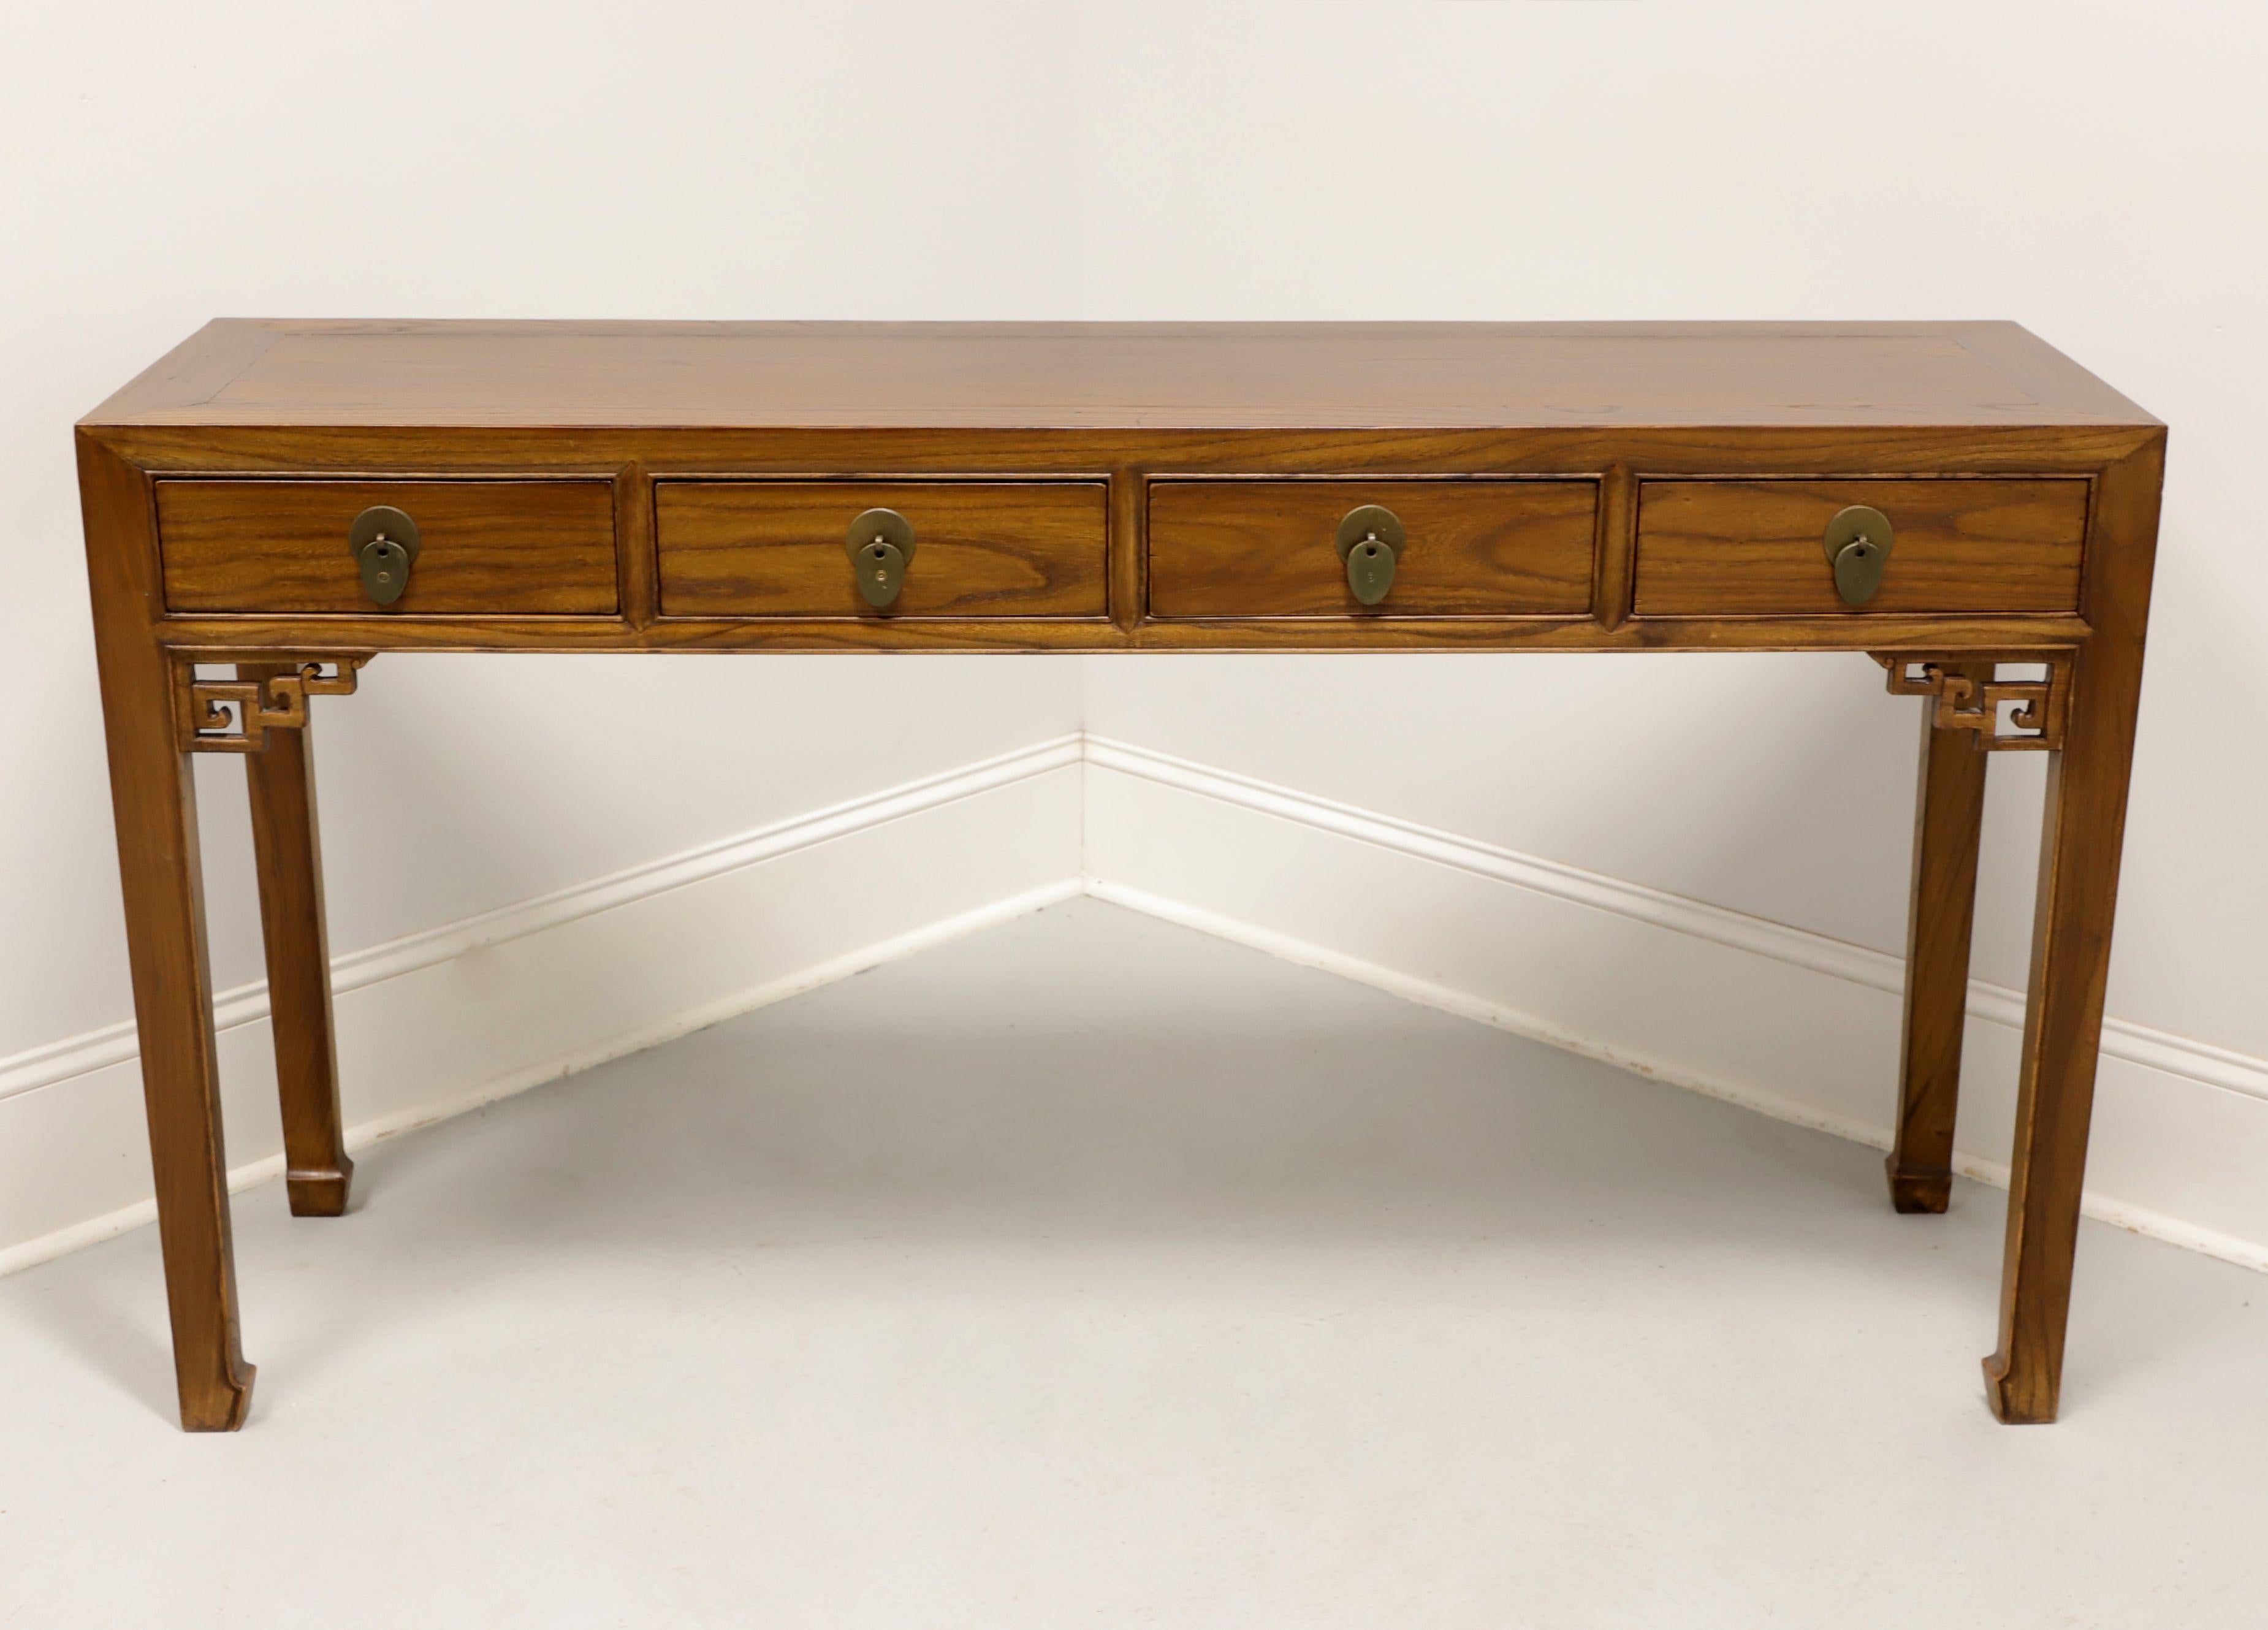 An Asian style console table, unbranded. Chinese elm with banded square edged top, brass hardware, decorative fretwork to corners, square straight legs, and turned inward feet. Features four drawers of dovetail construction. Likely made in the USA,